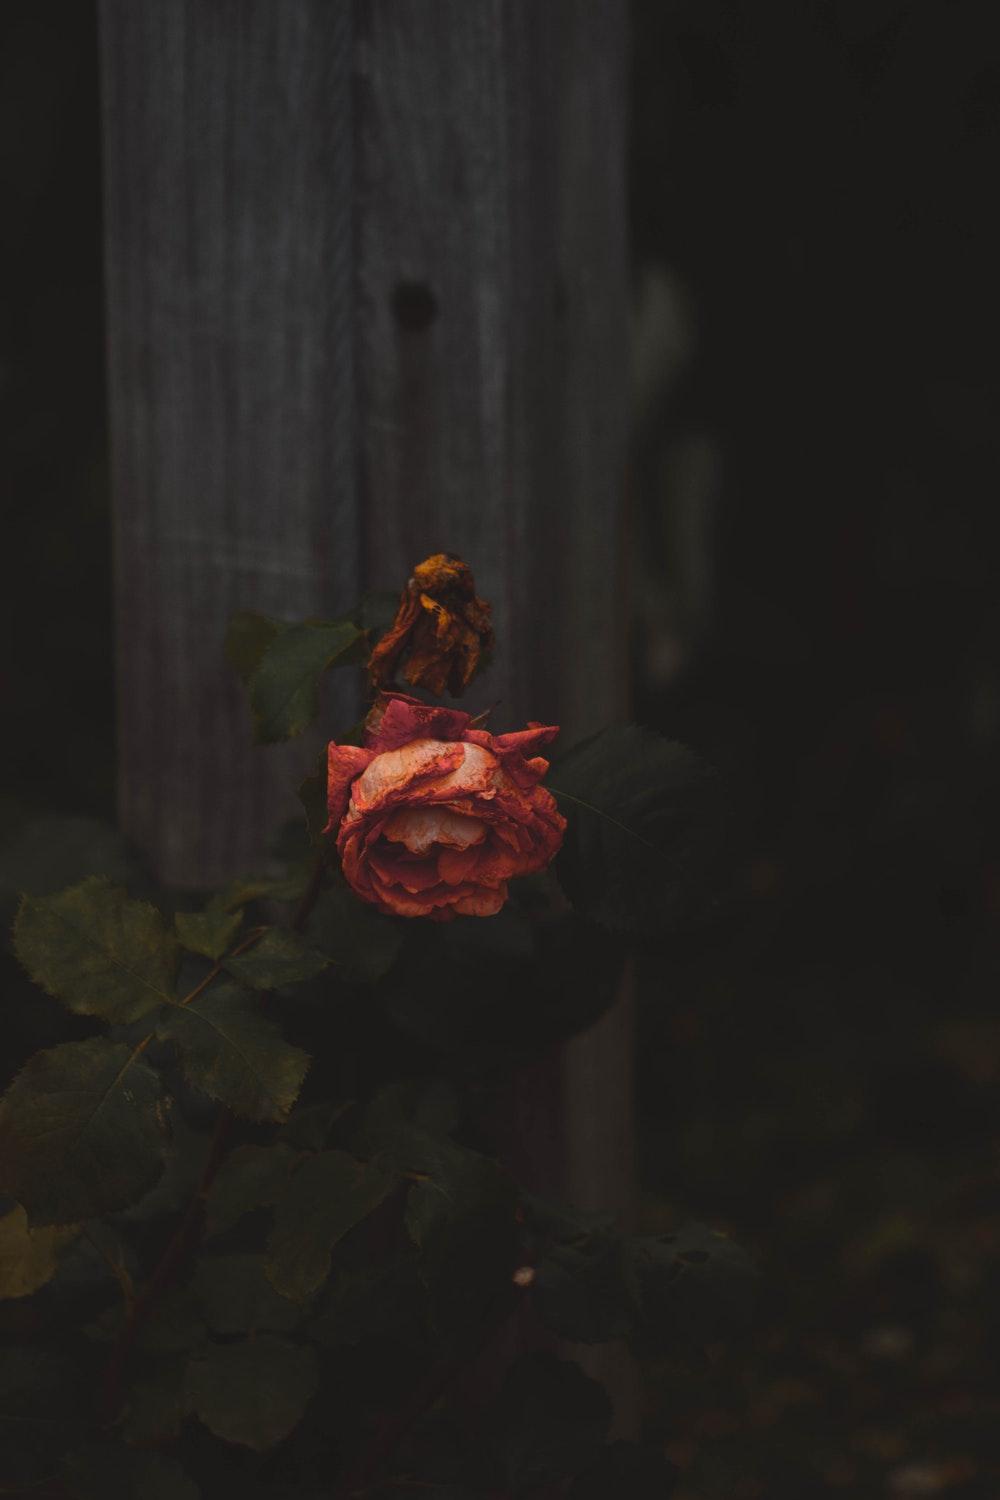 Dying Rose Picture. Download Free Image